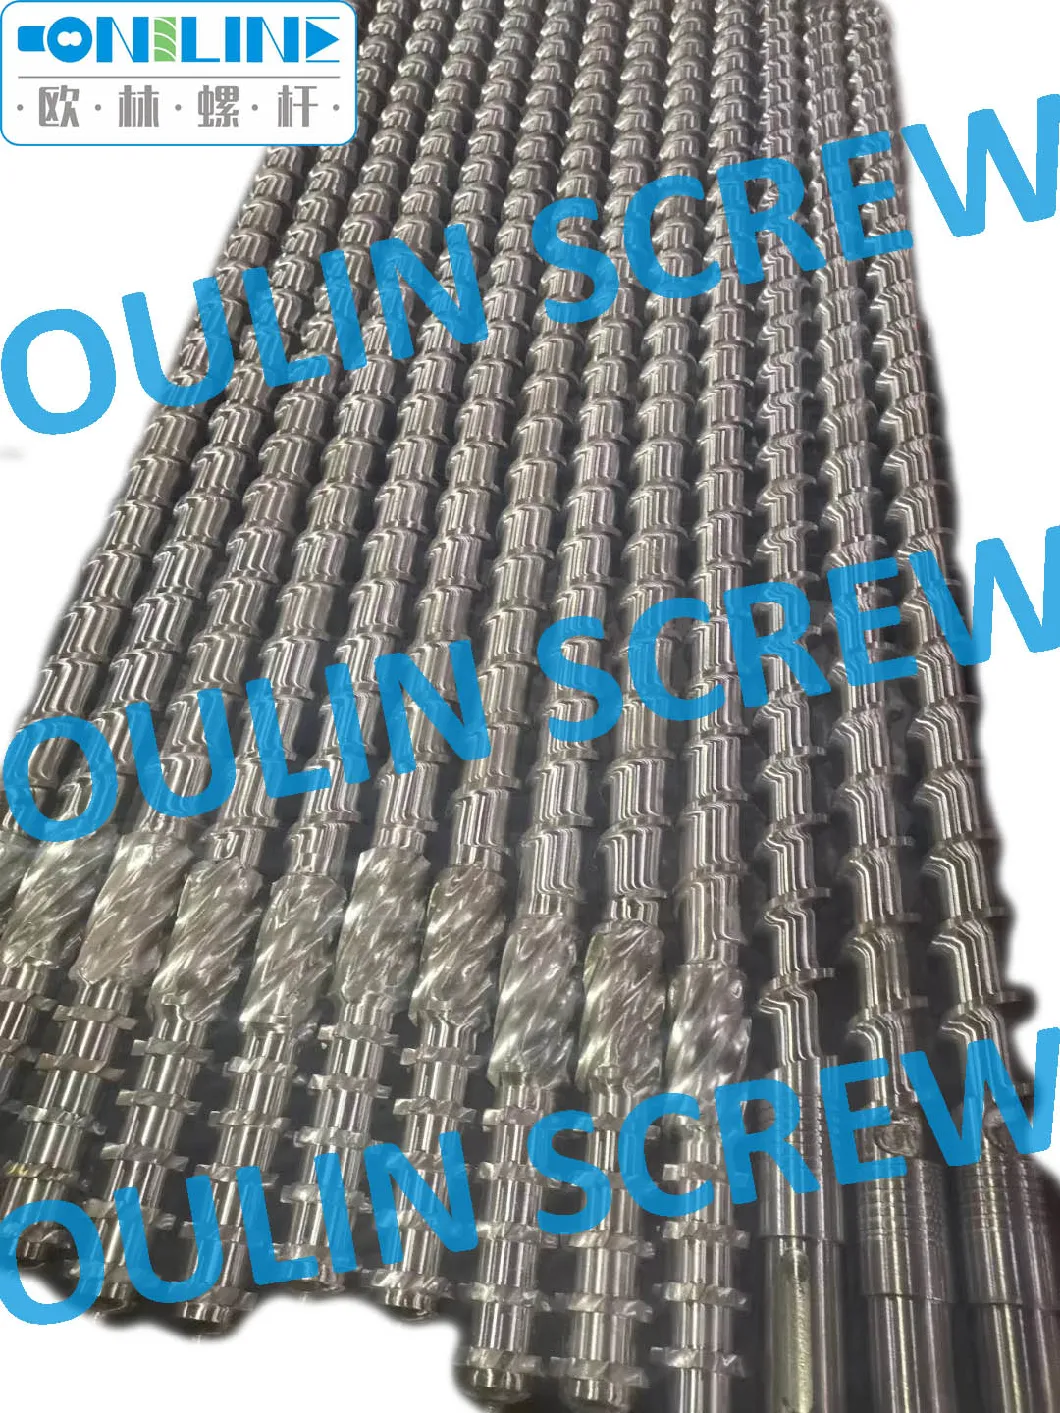 Bimetal PP Screw and Barrel for Non-Woven Melt-Blown Fabric Extrusion